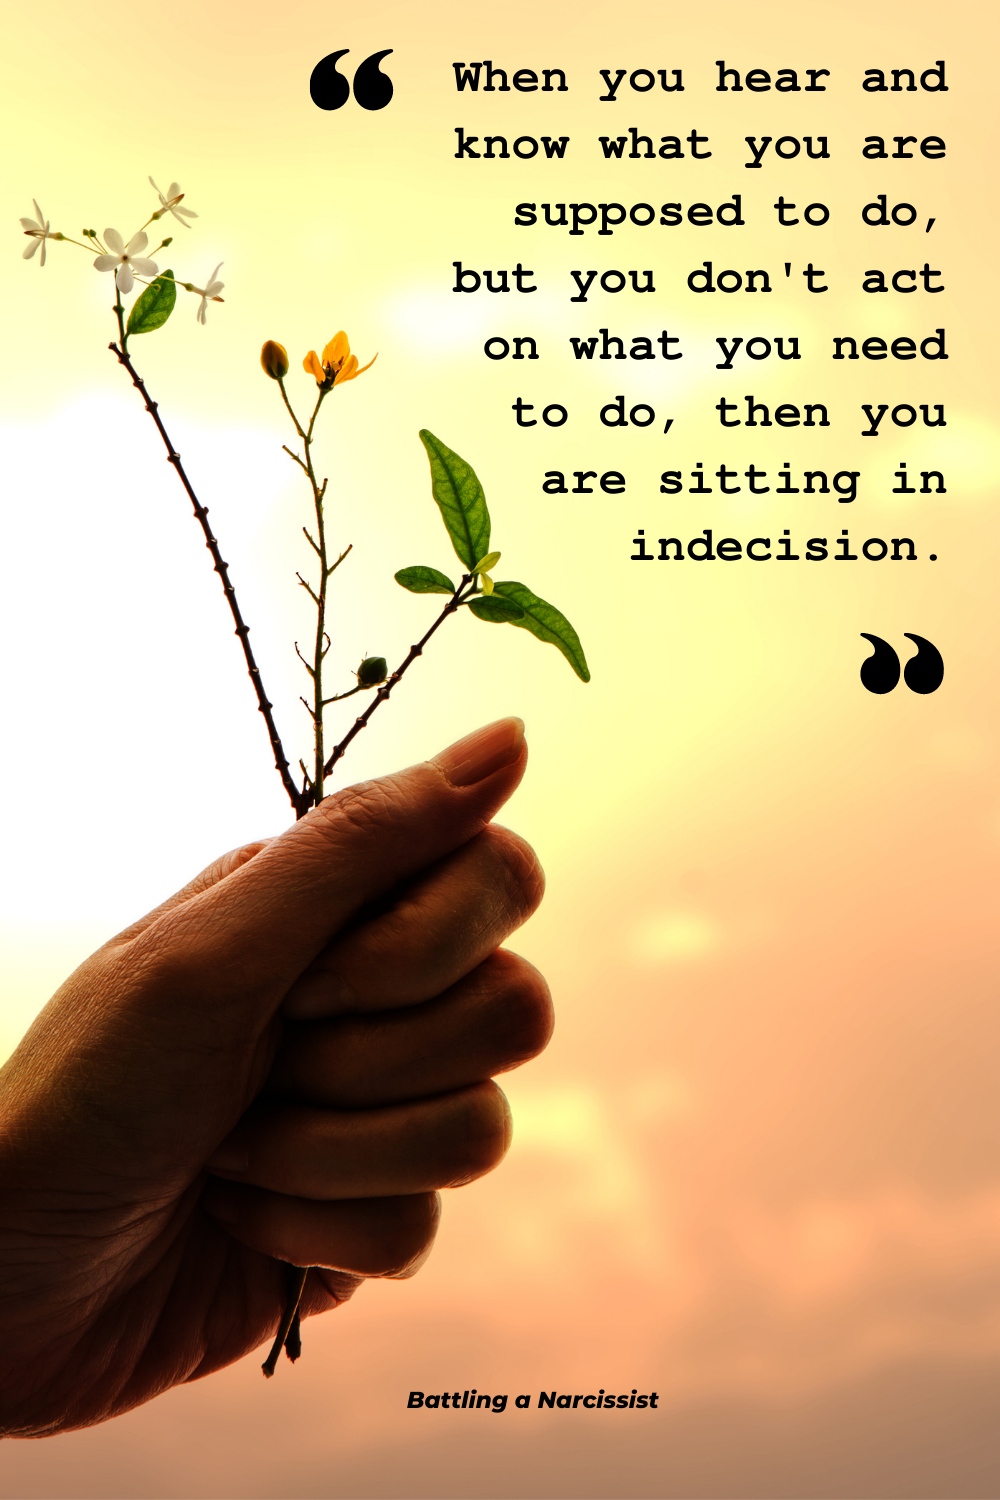 When you hear and know what you are supposed to do, but you don't act on what you need to do, then you are sitting in indecision. Until you start moving in a direction, you will not see what direction you need to go. #indecision #abuse #marriage #relationship #toxic #emotionalabuse